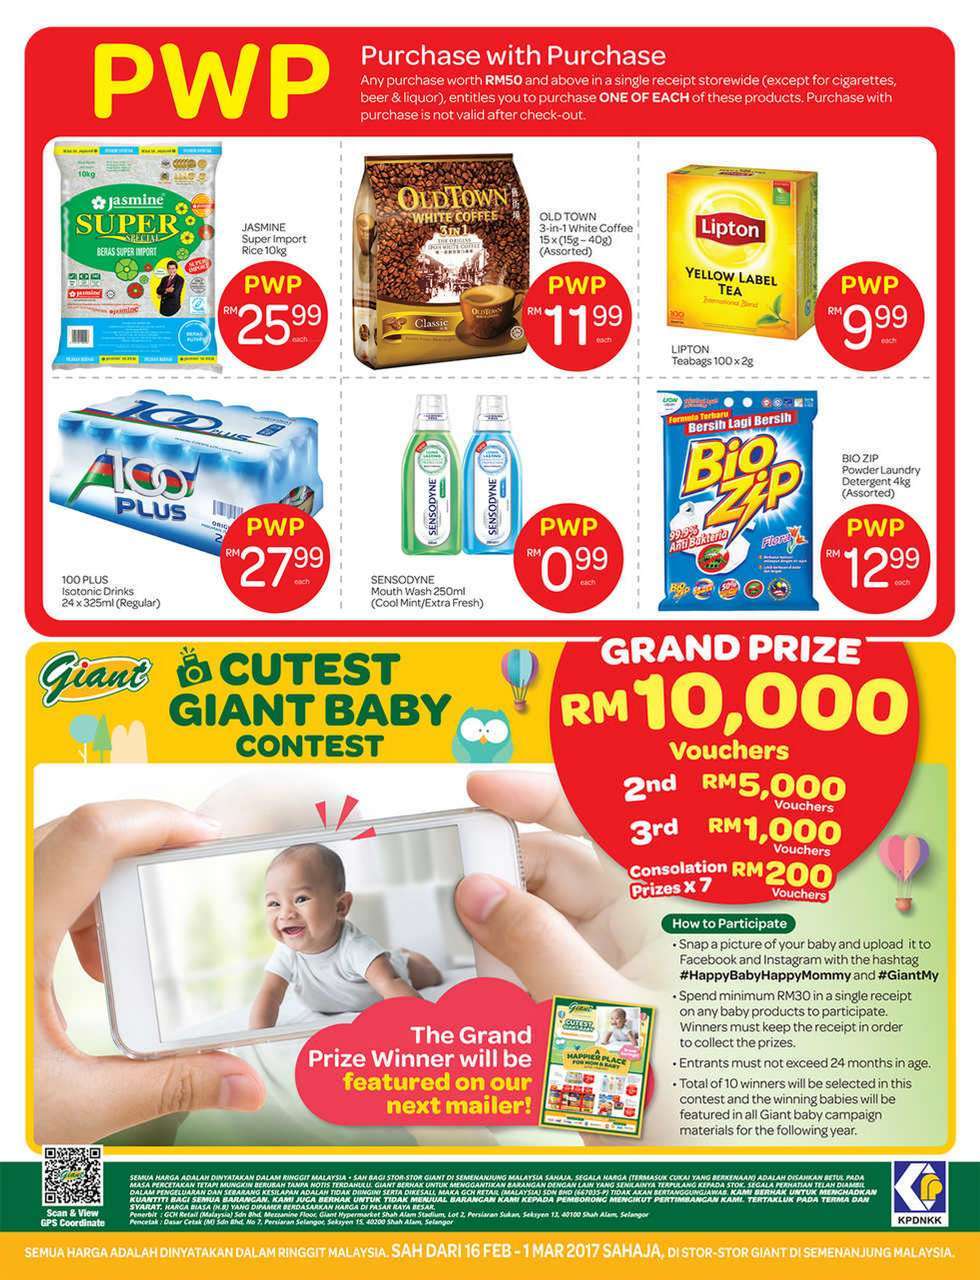 Giant Catalogue (16 February 2017 - 1 March 2017)